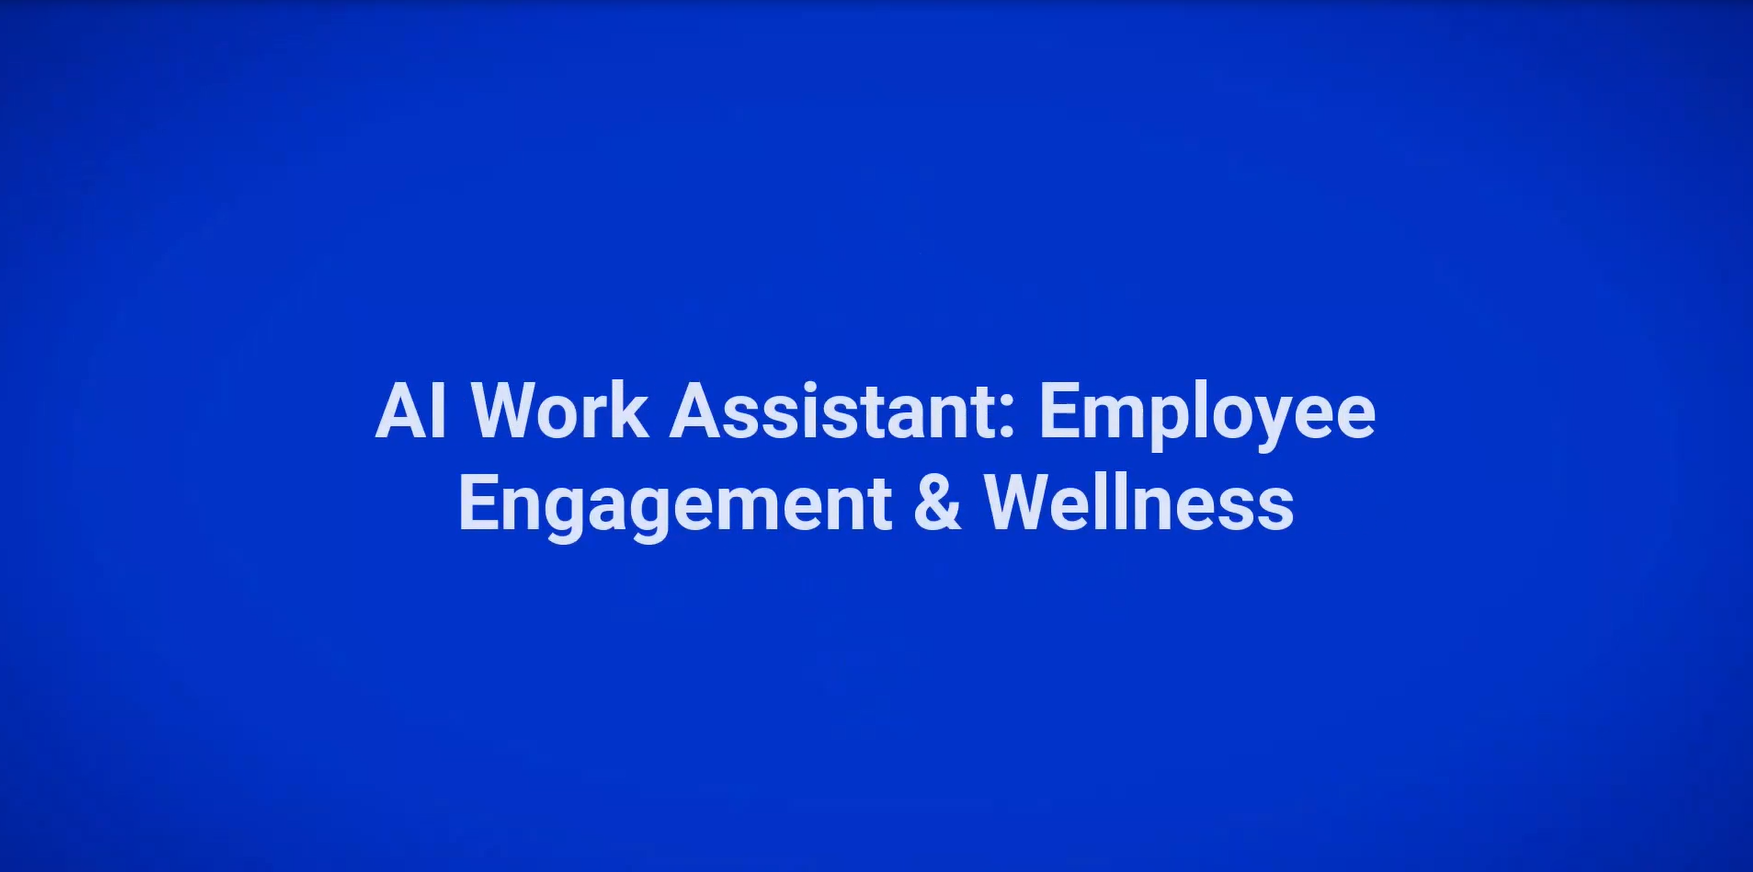 A brief overview of Workgrid use cases to support employee engagement and wellness.